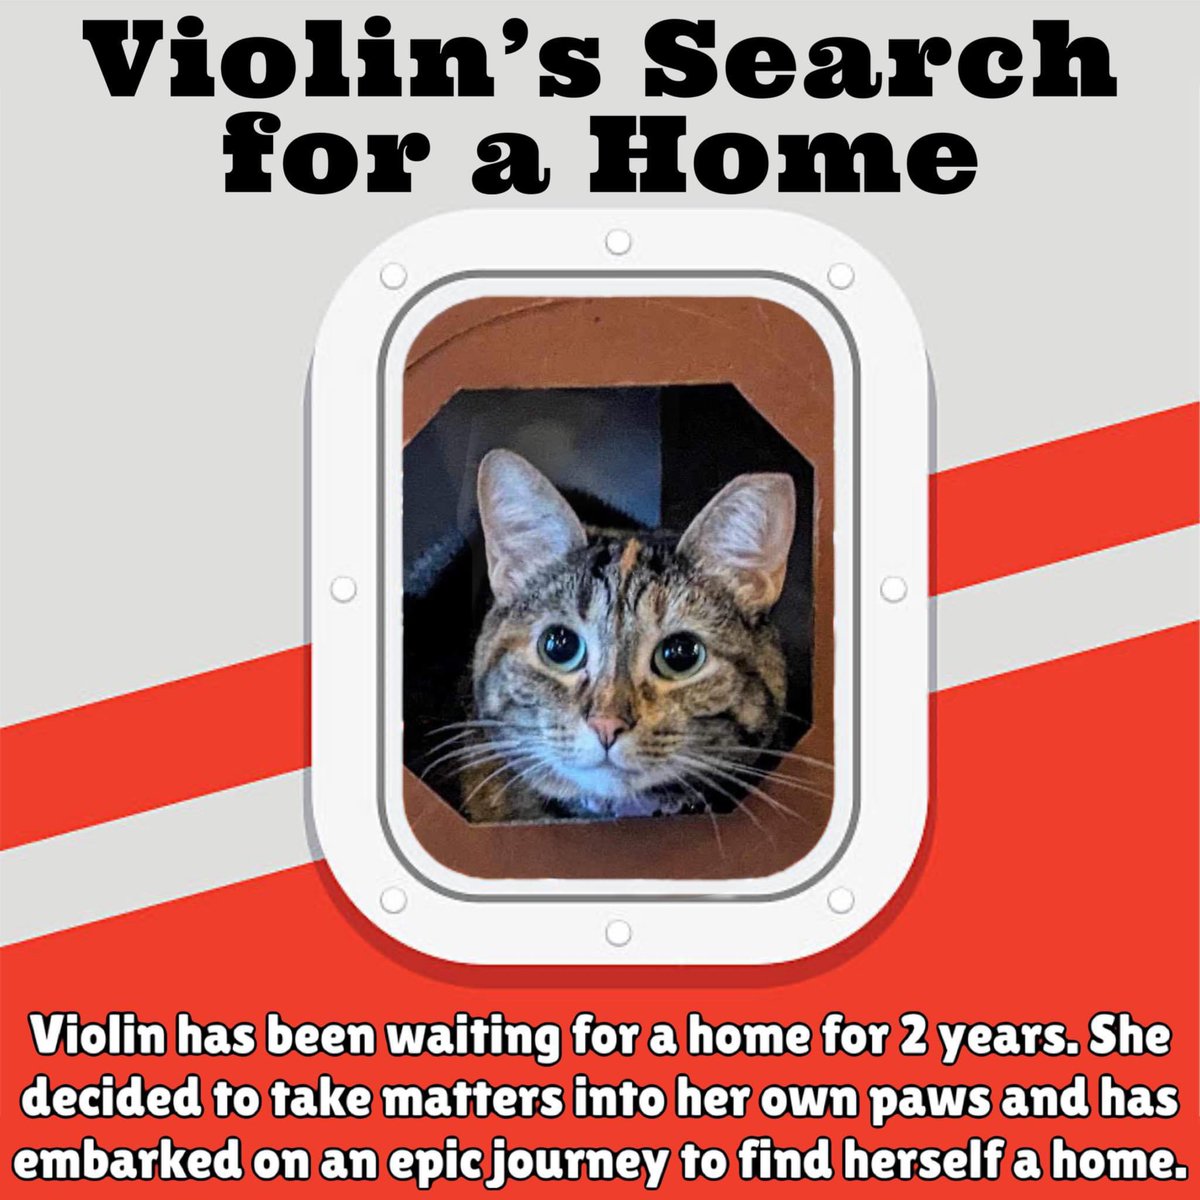 Take two! 

❤️❤️Loudoun County, VA. 2 years!!! 😿😿

VIOLIN 🎻 has just embarked on a worldwide quest to find a purr-manent home! Learn more about this beautiful kitty on their website and apply to adopt her today! #WhereisViolin #FeeWaived #adoptdontshop